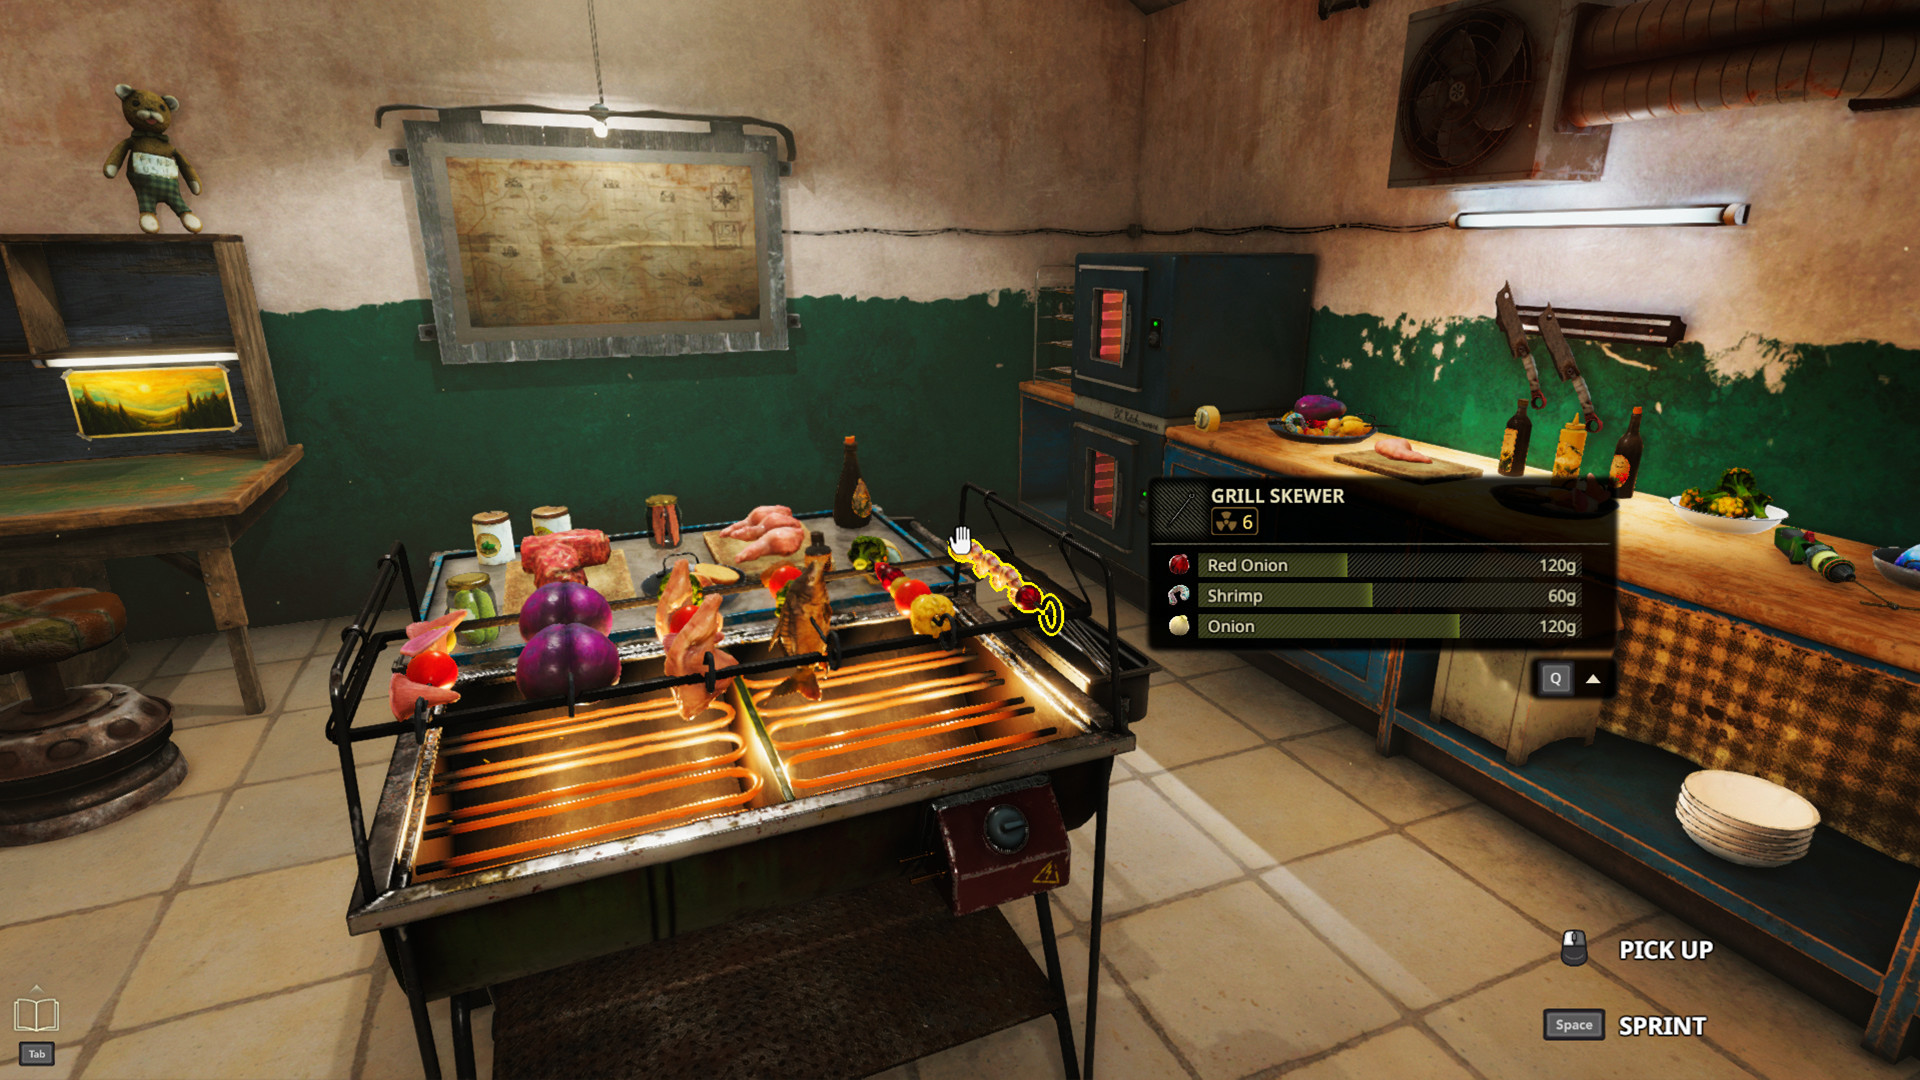 Steam :: Cooking Simulator :: Chaos Tool FREE DLC now available!